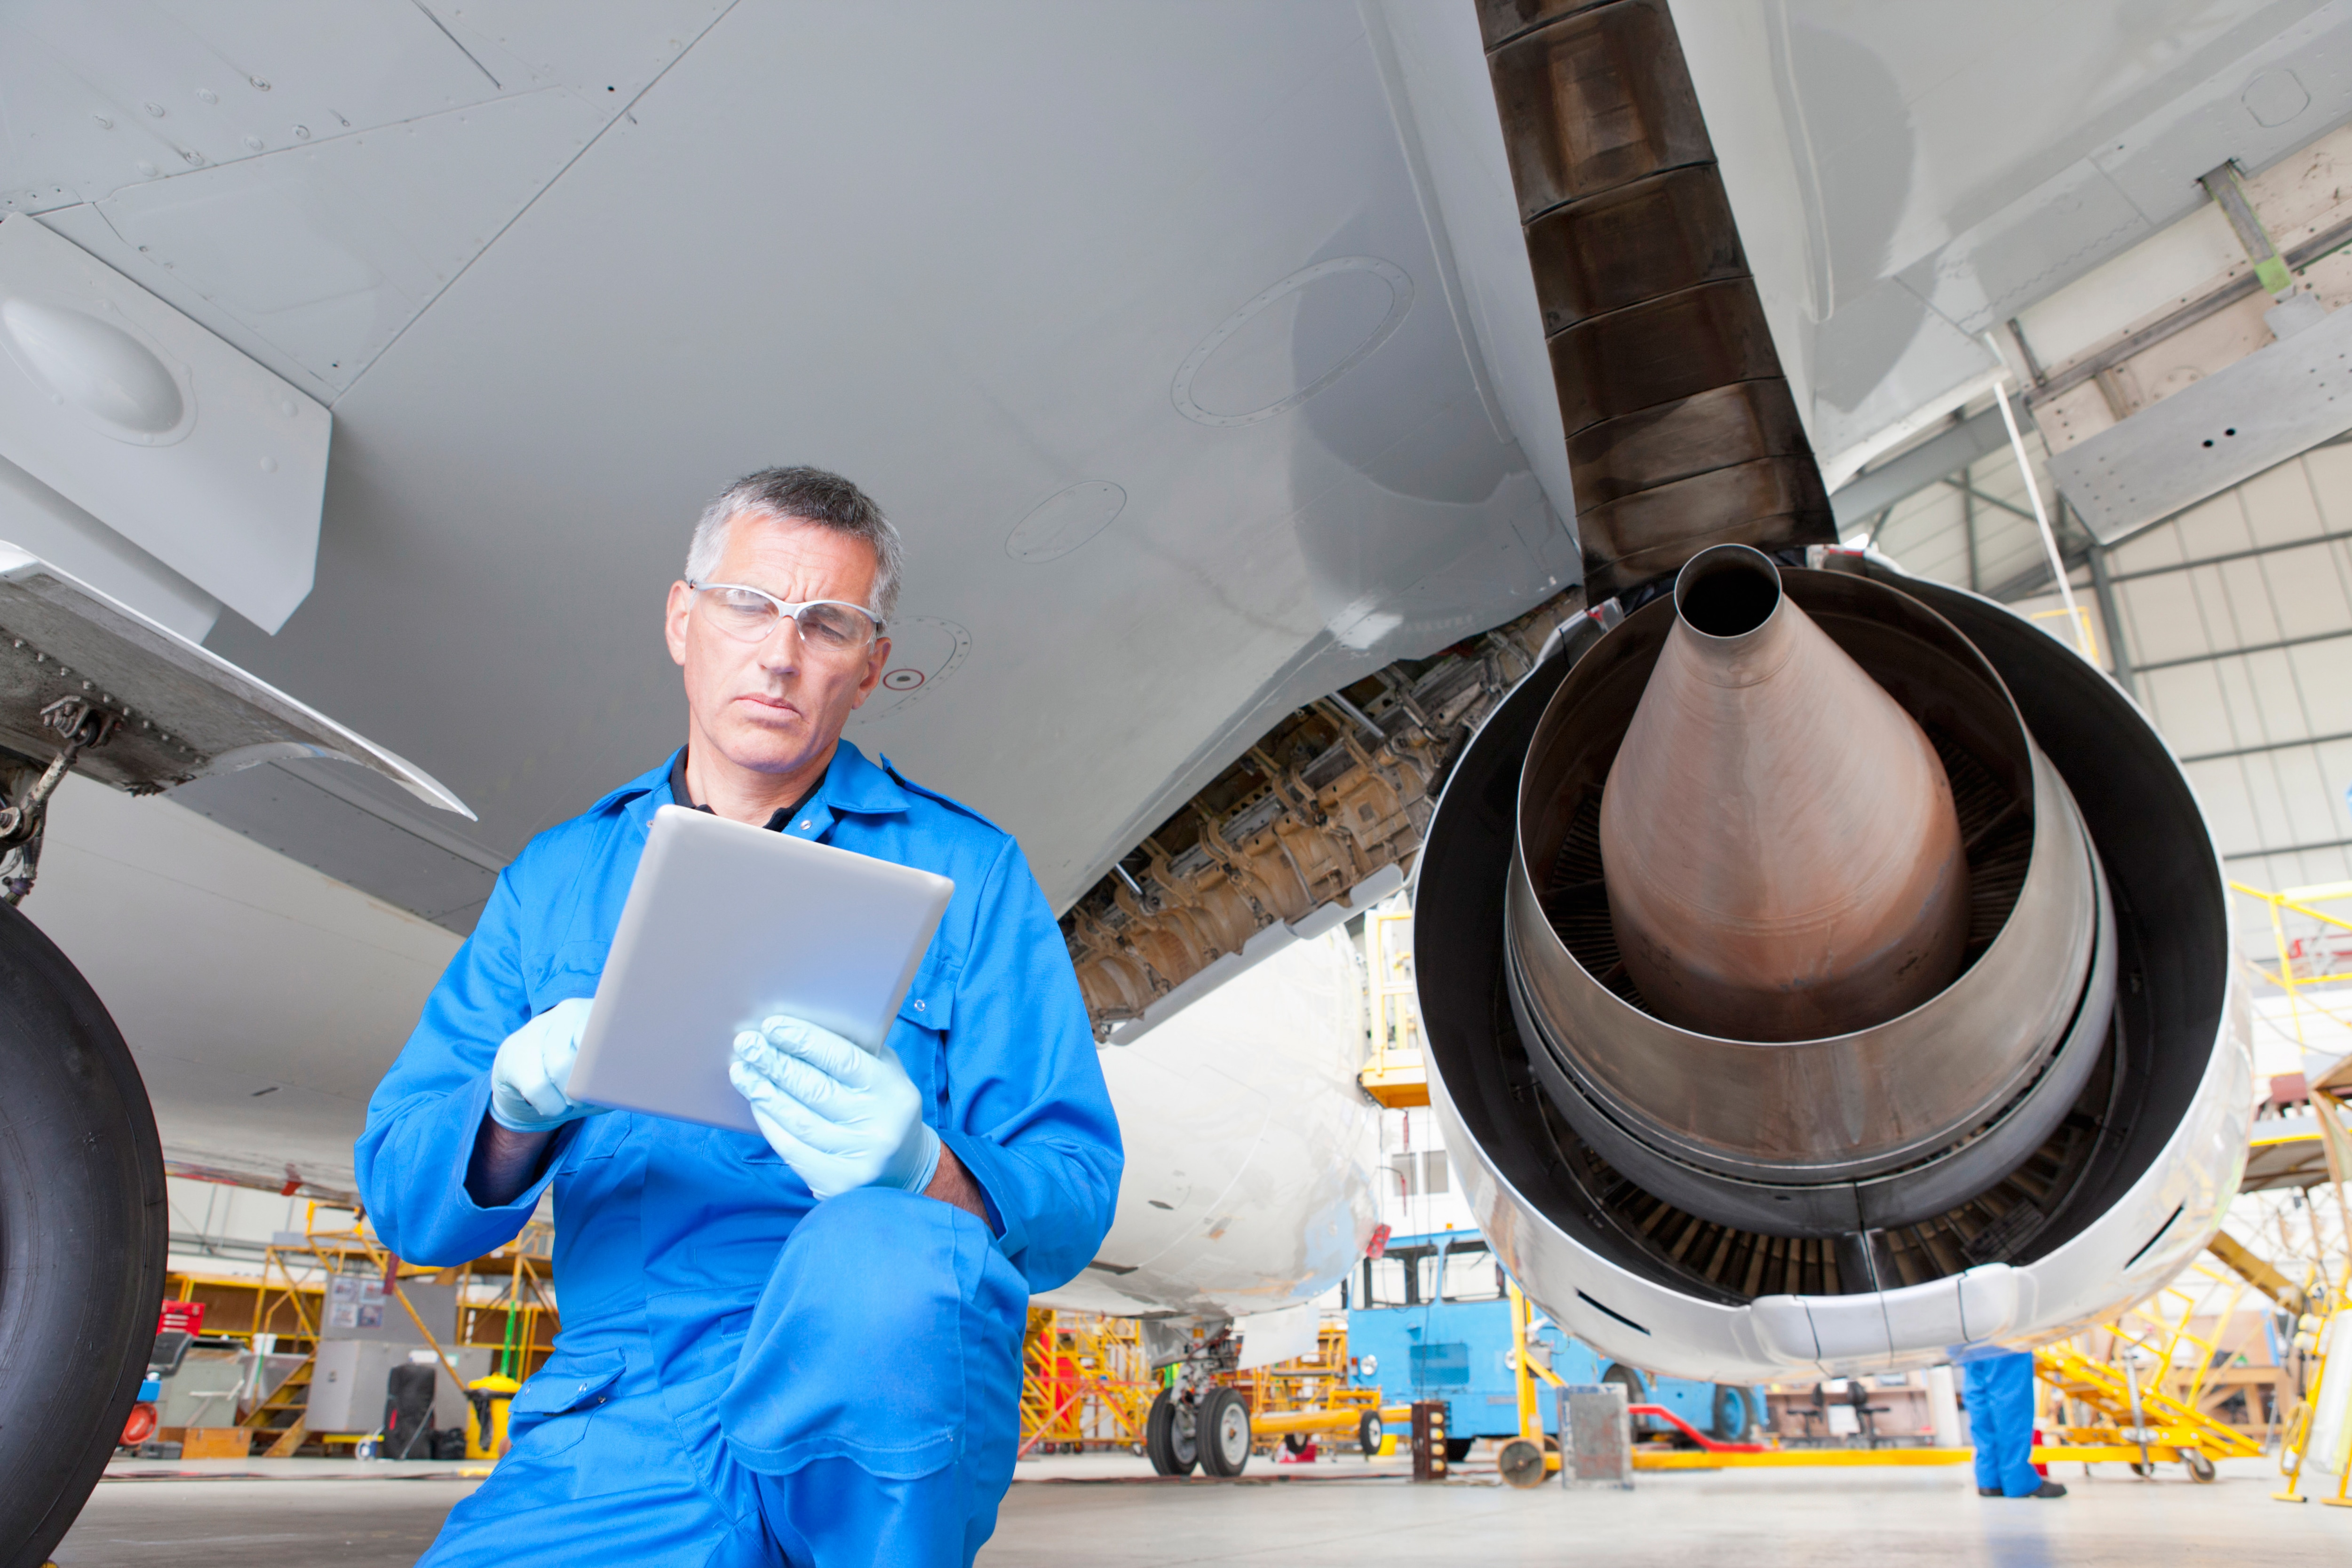 Contractor looking at a tablet under and airplane